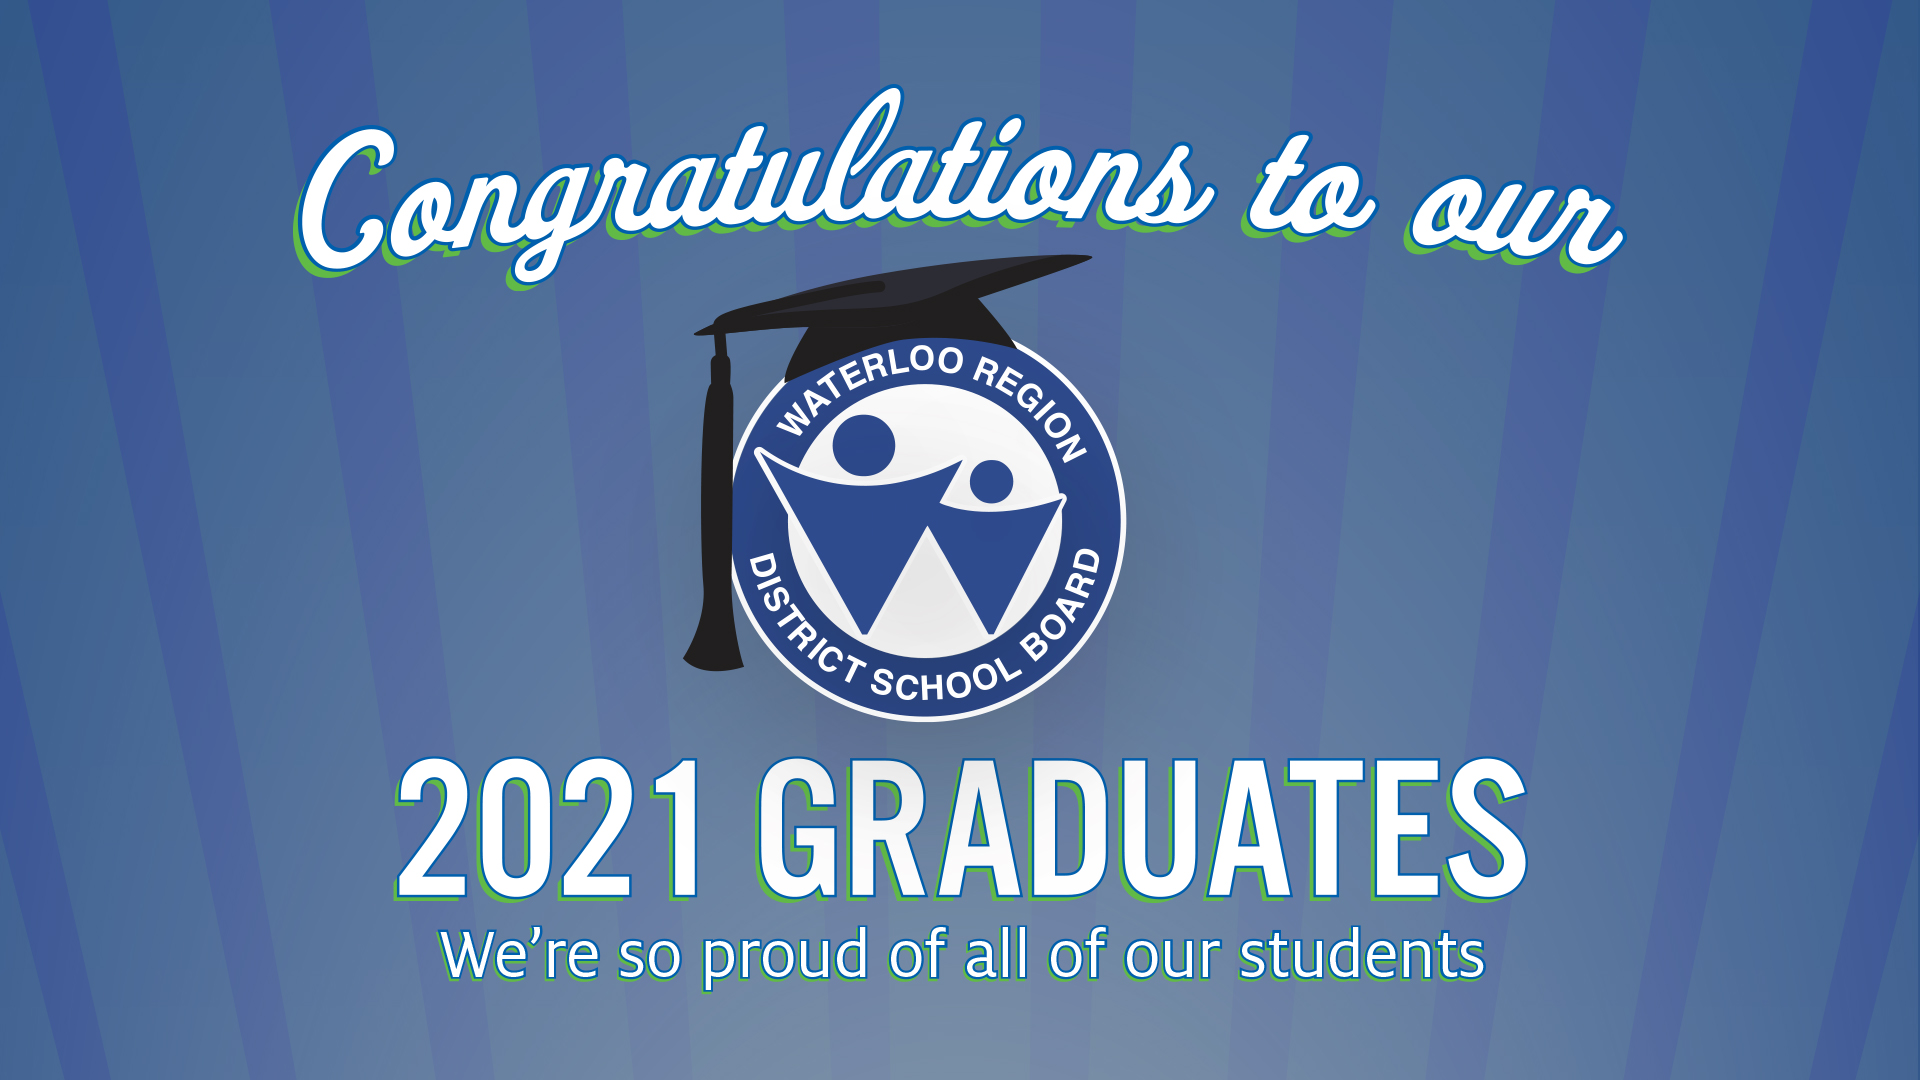 Congratulations to our 2021 Graduates: We're so proud of all of our students.